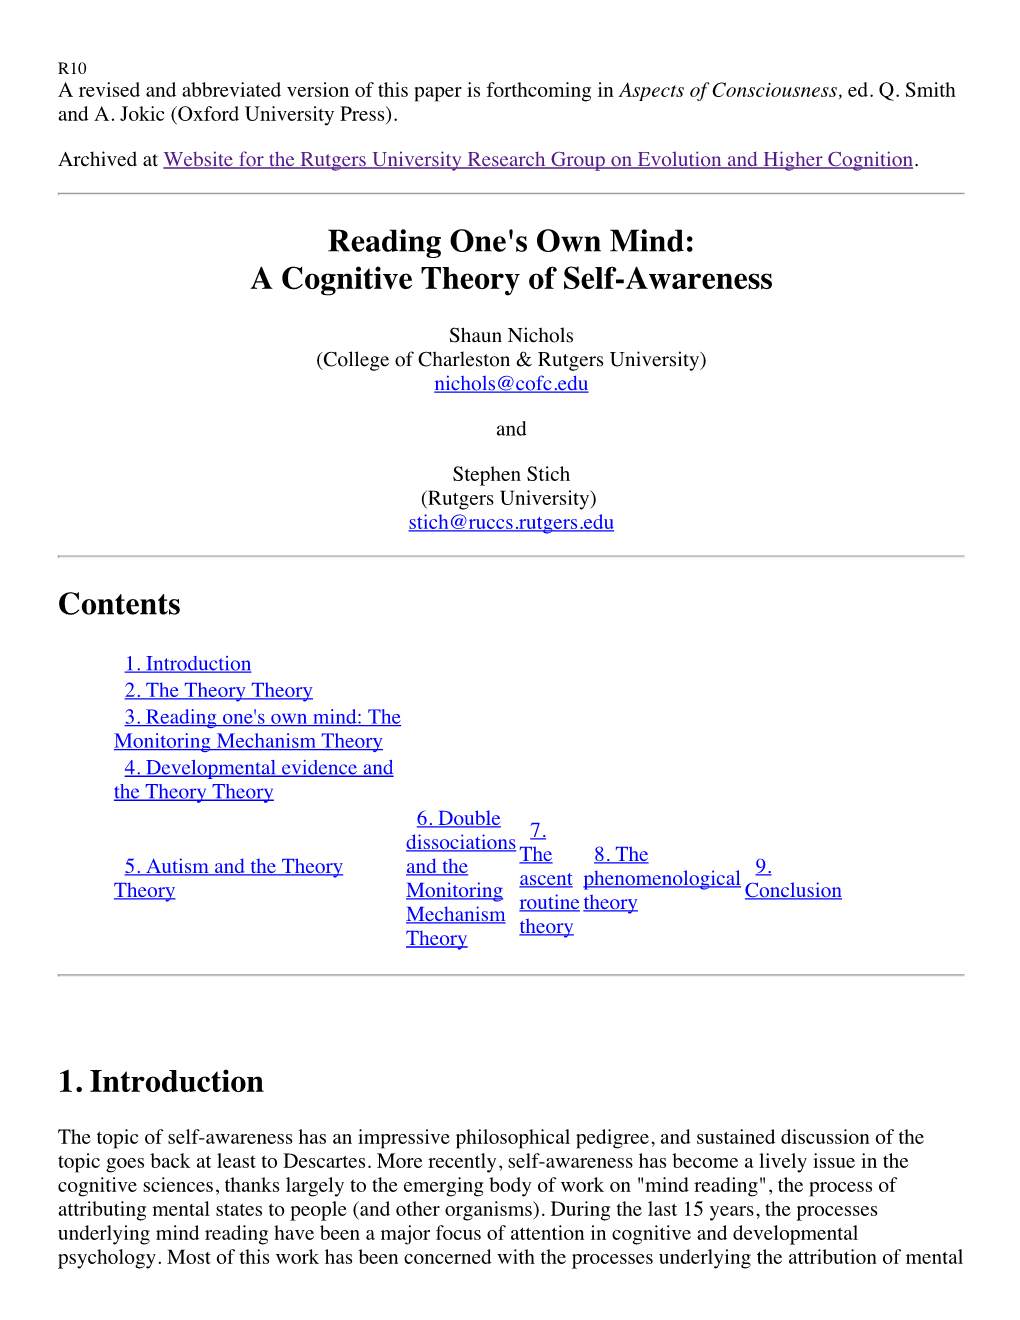 Reading One's Own Mind: a Cognitive Theory of Self-Awareness